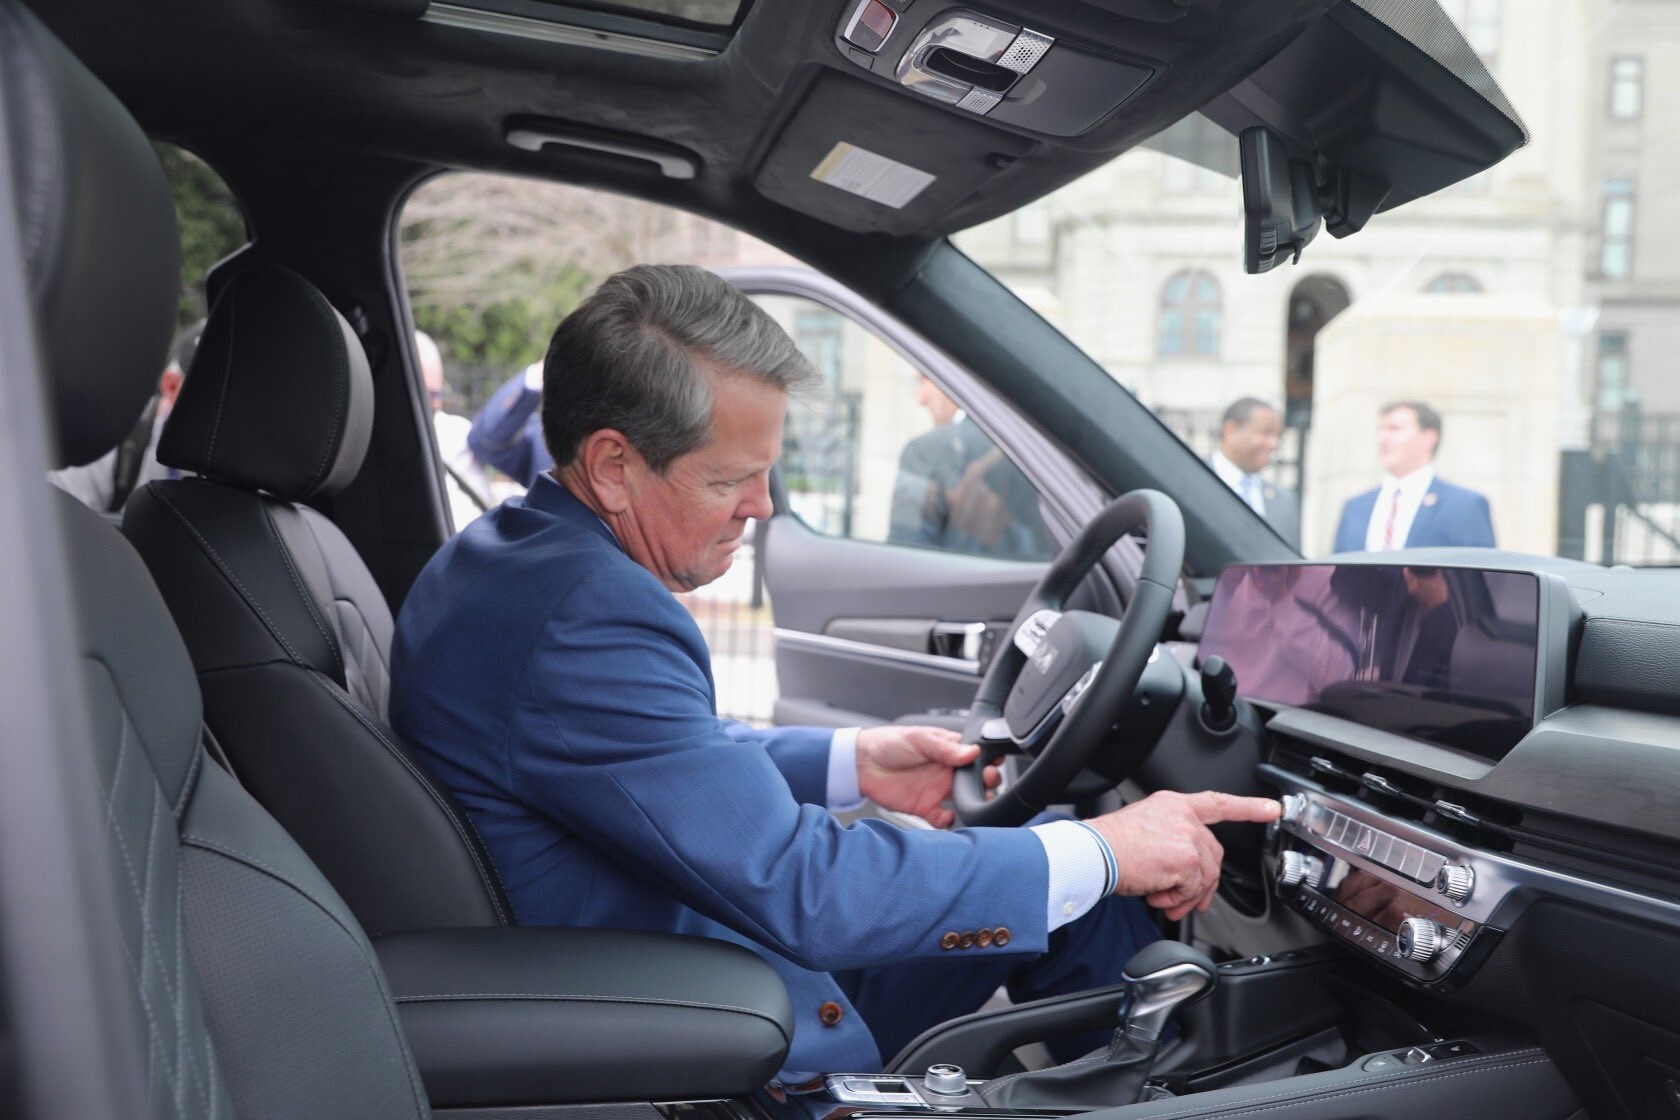 Georgia Gov. Brian Kemp checks out a Kia SUV made in his state at the inaugural Kia Day at the State Capitol in Atlanta. (Gov. Kemp's office, via Twitter)